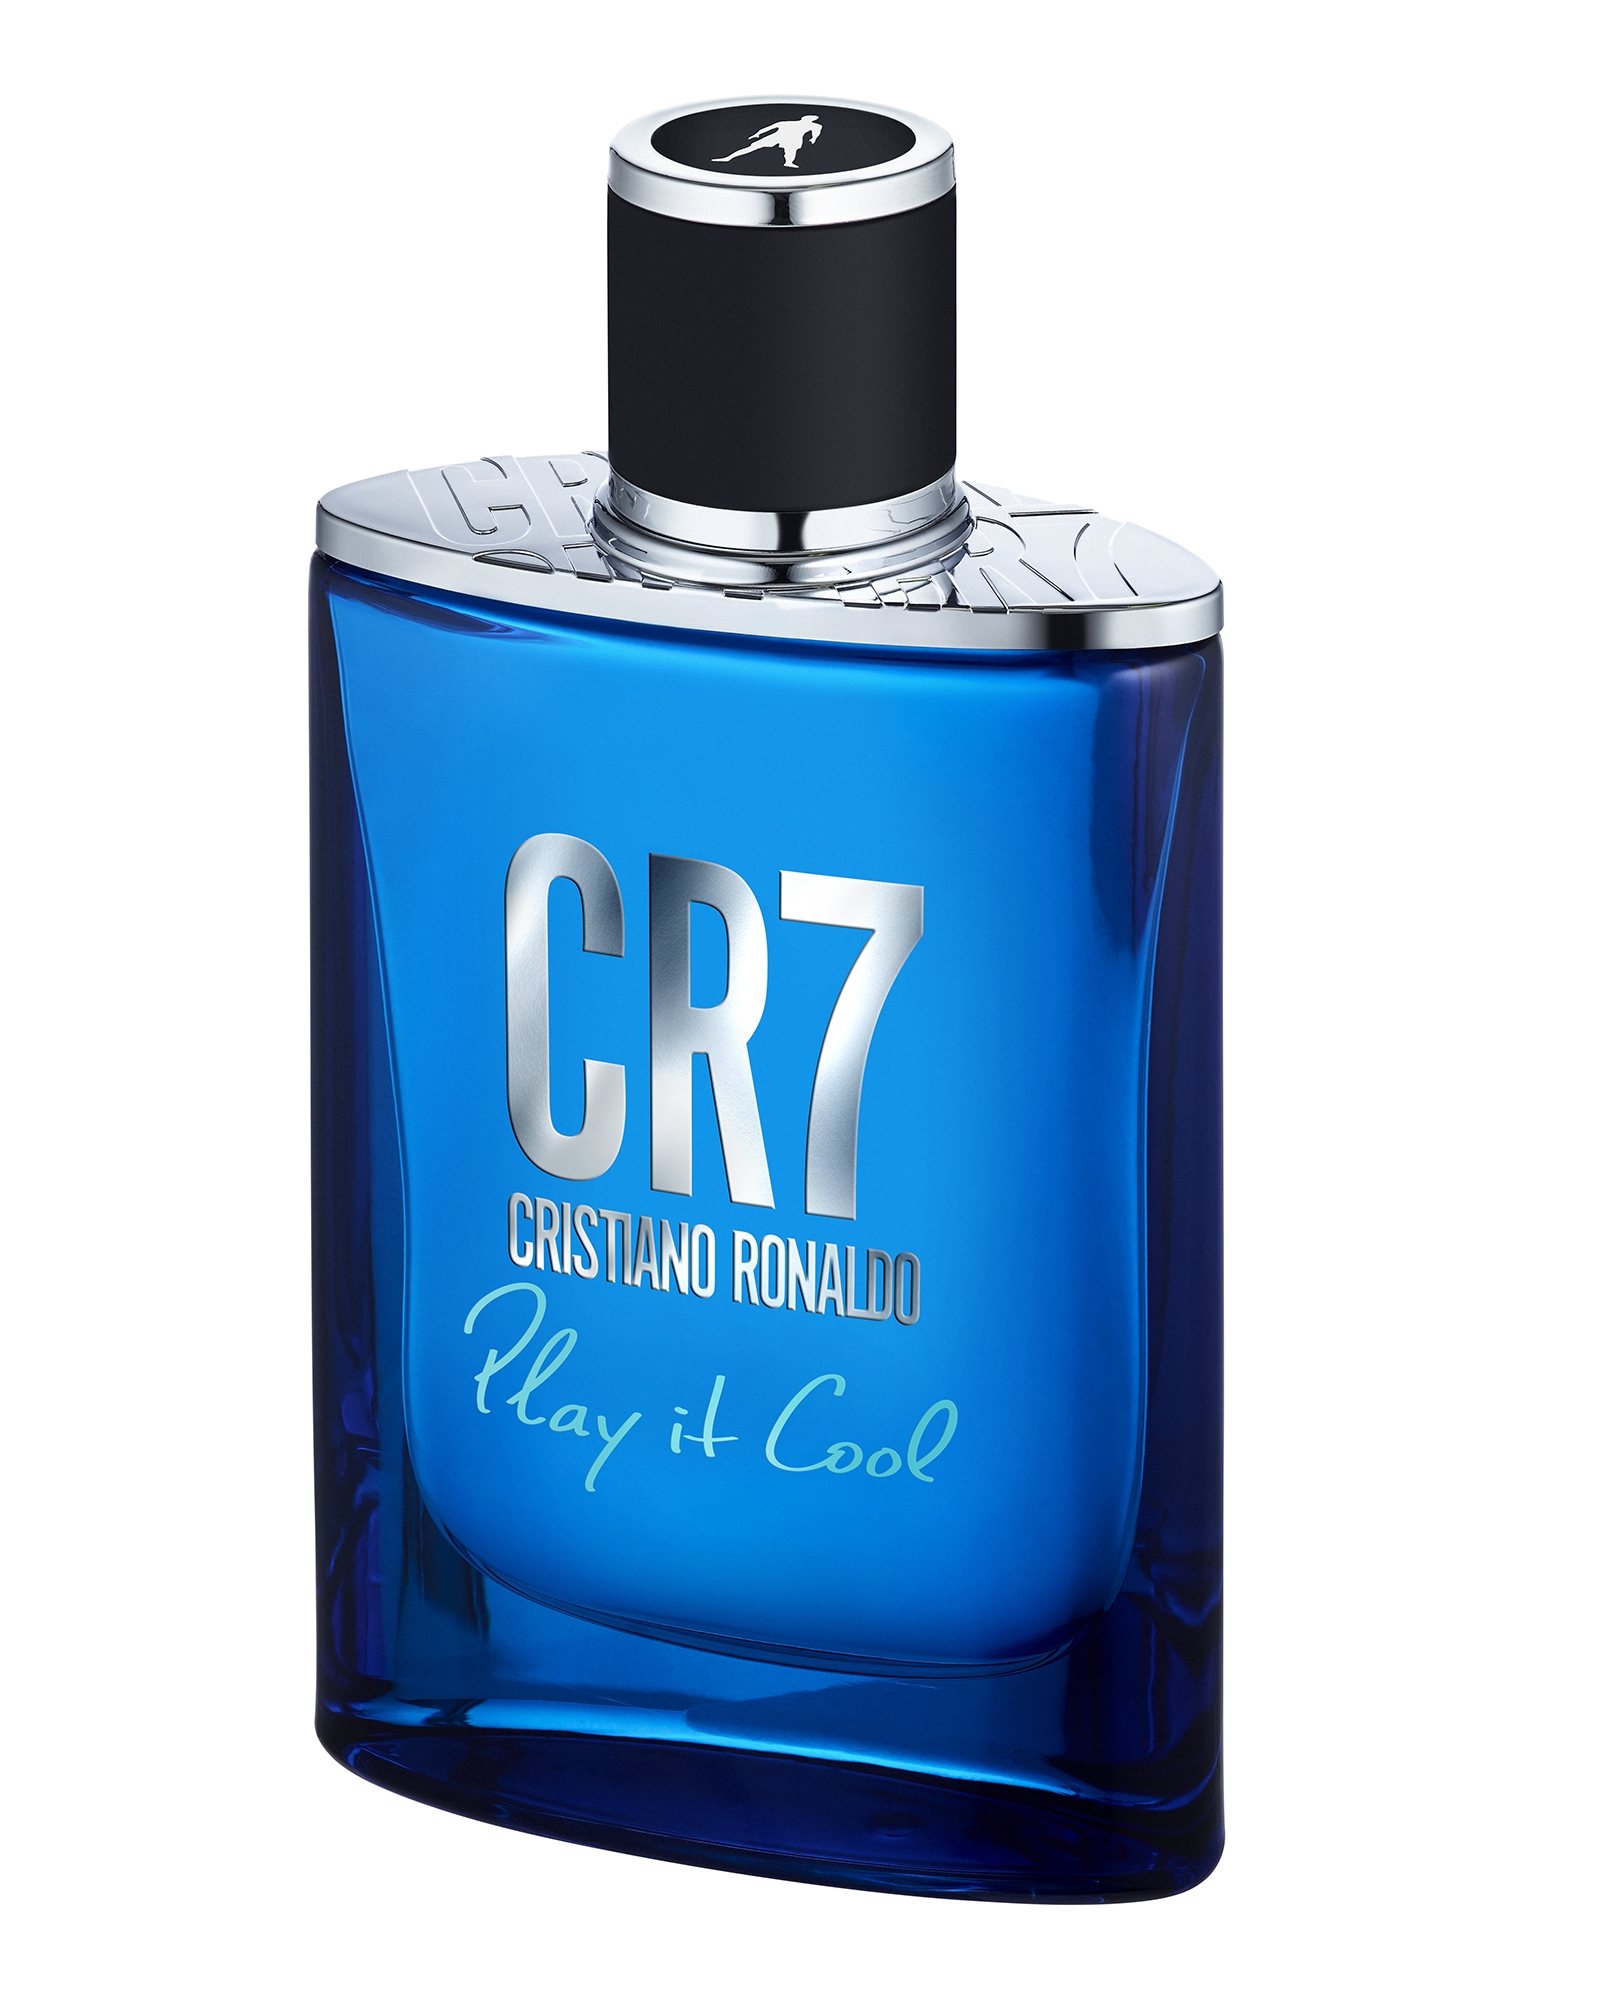 CR7 - Cristiano Ronaldo - The Brand New Fragrance - Play it Cool -  Exclusive Collection - Luxury Fragrance - 50 ml - Avvenice